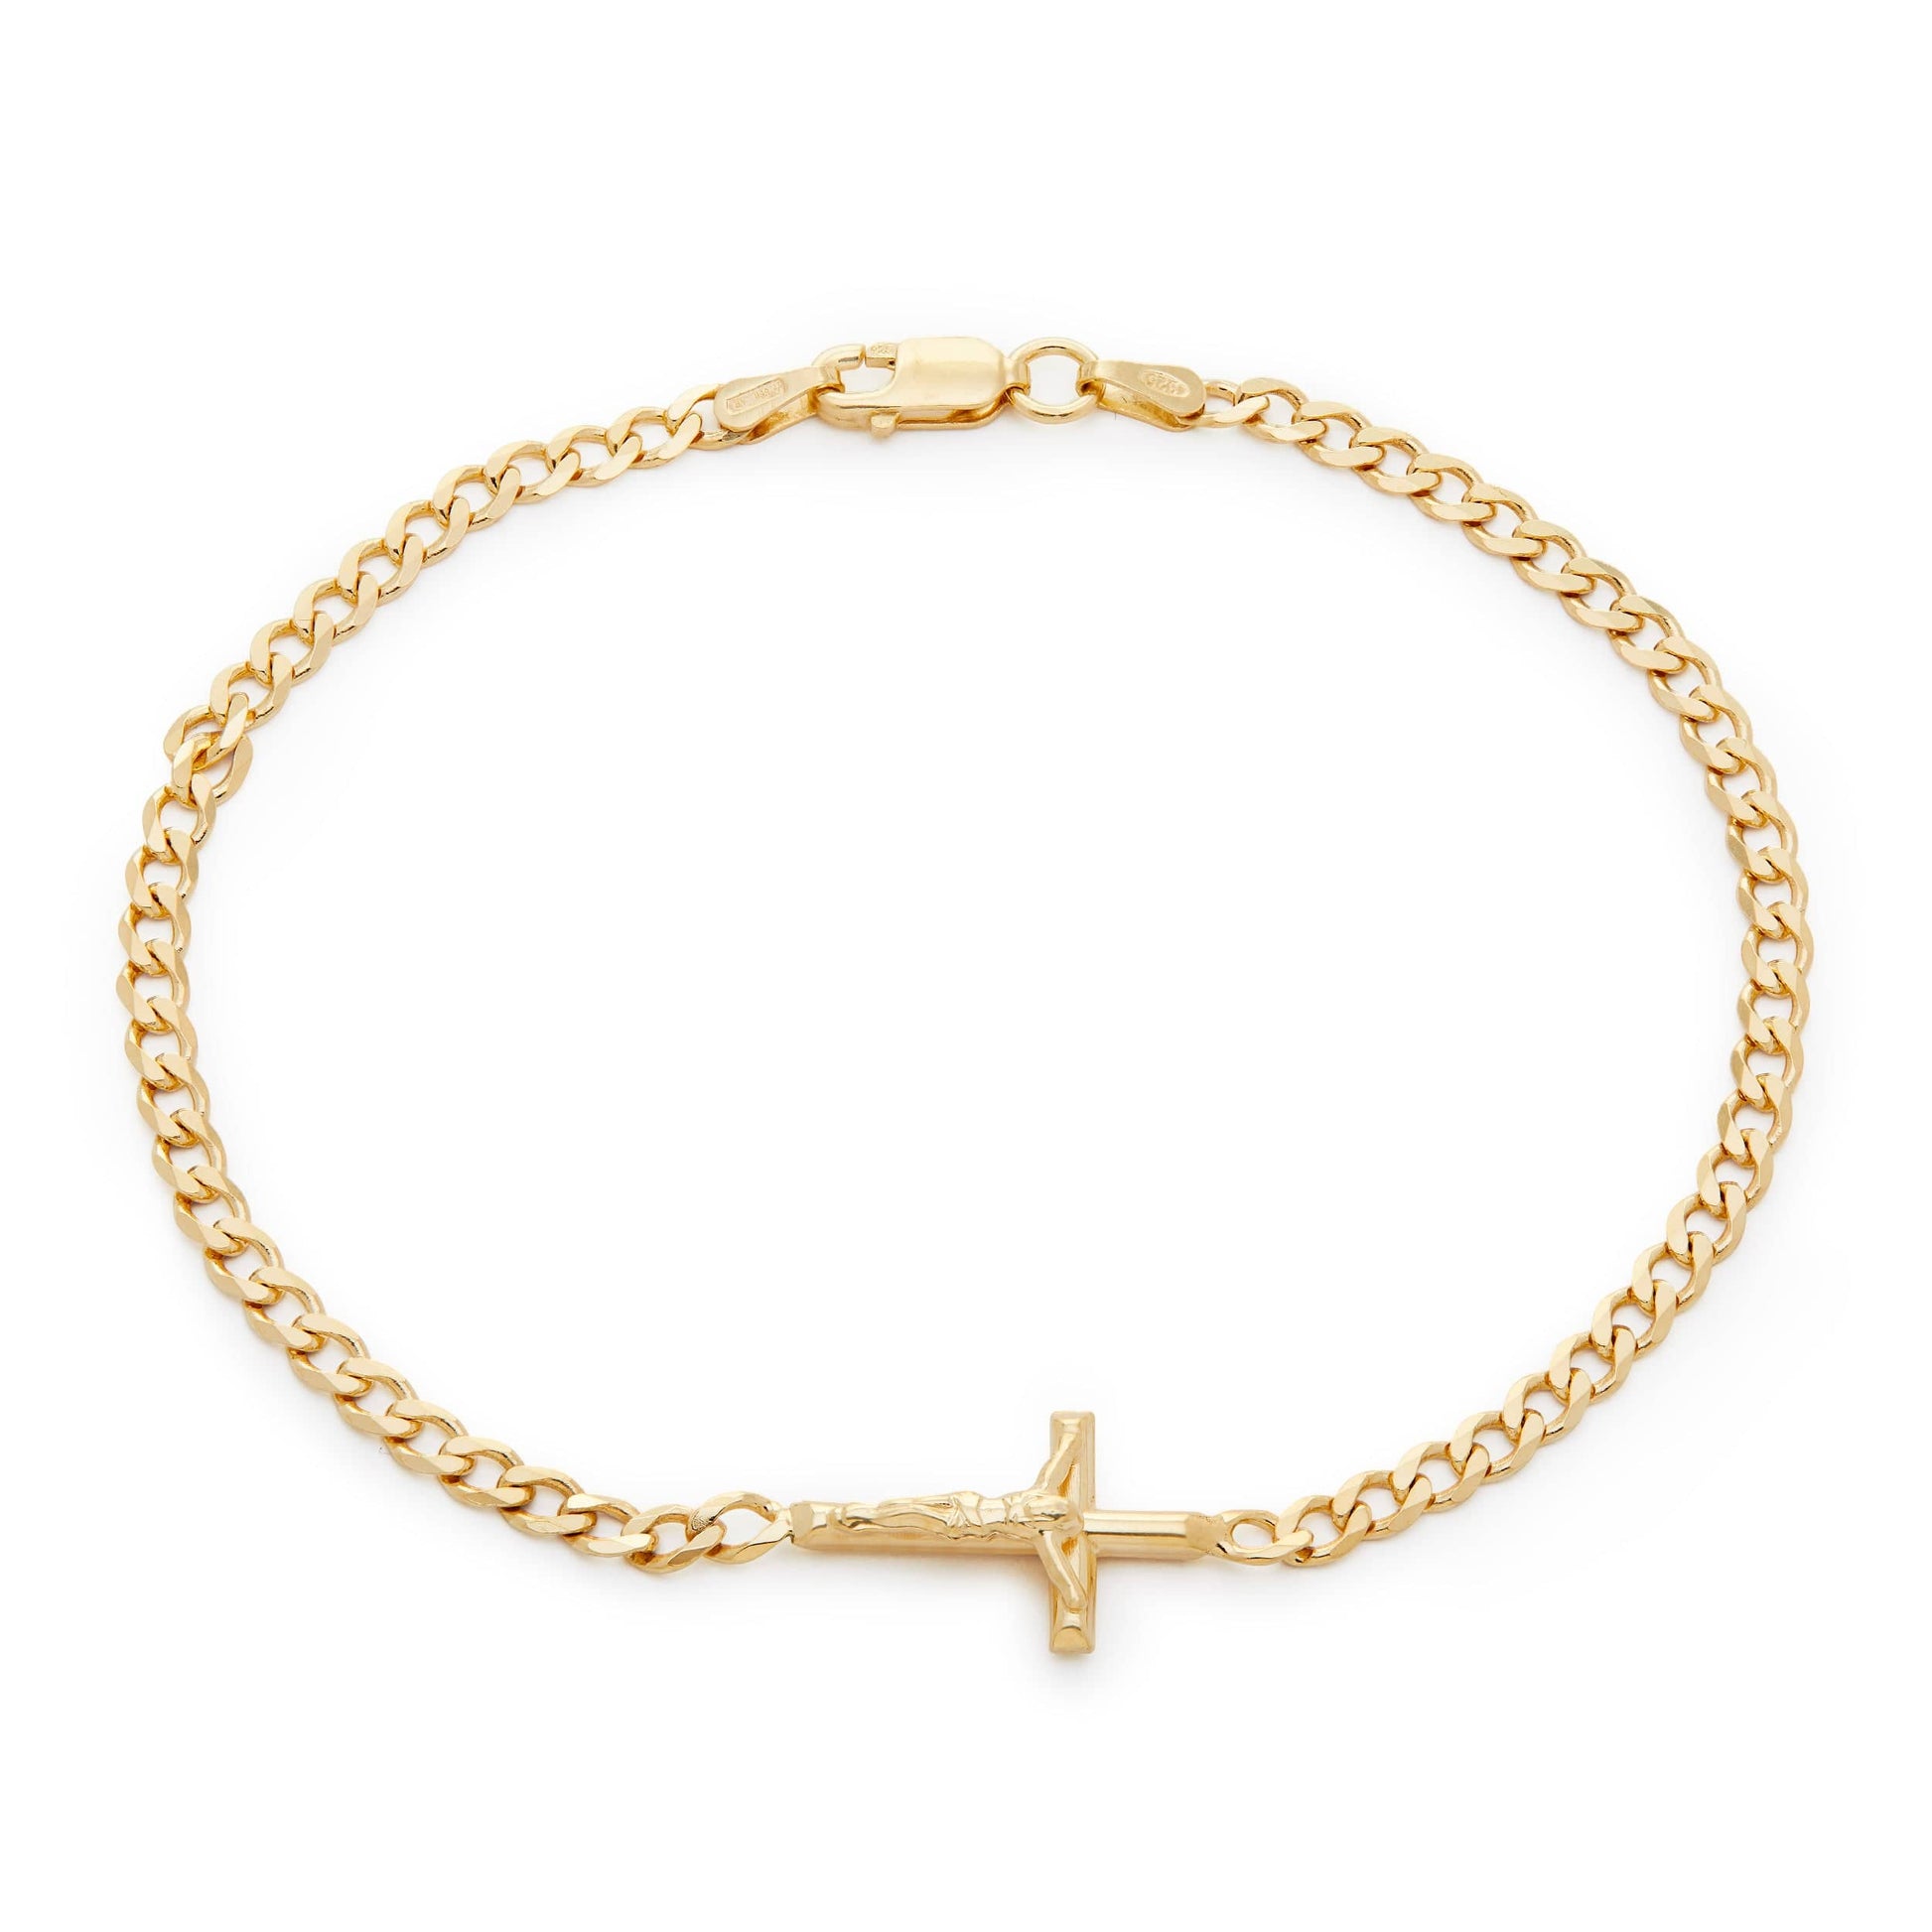 MONDO CATTOLICO Apparel & Accessories 21 Cm (8.26 in) Sterling Silver Bracelet with Crucifix